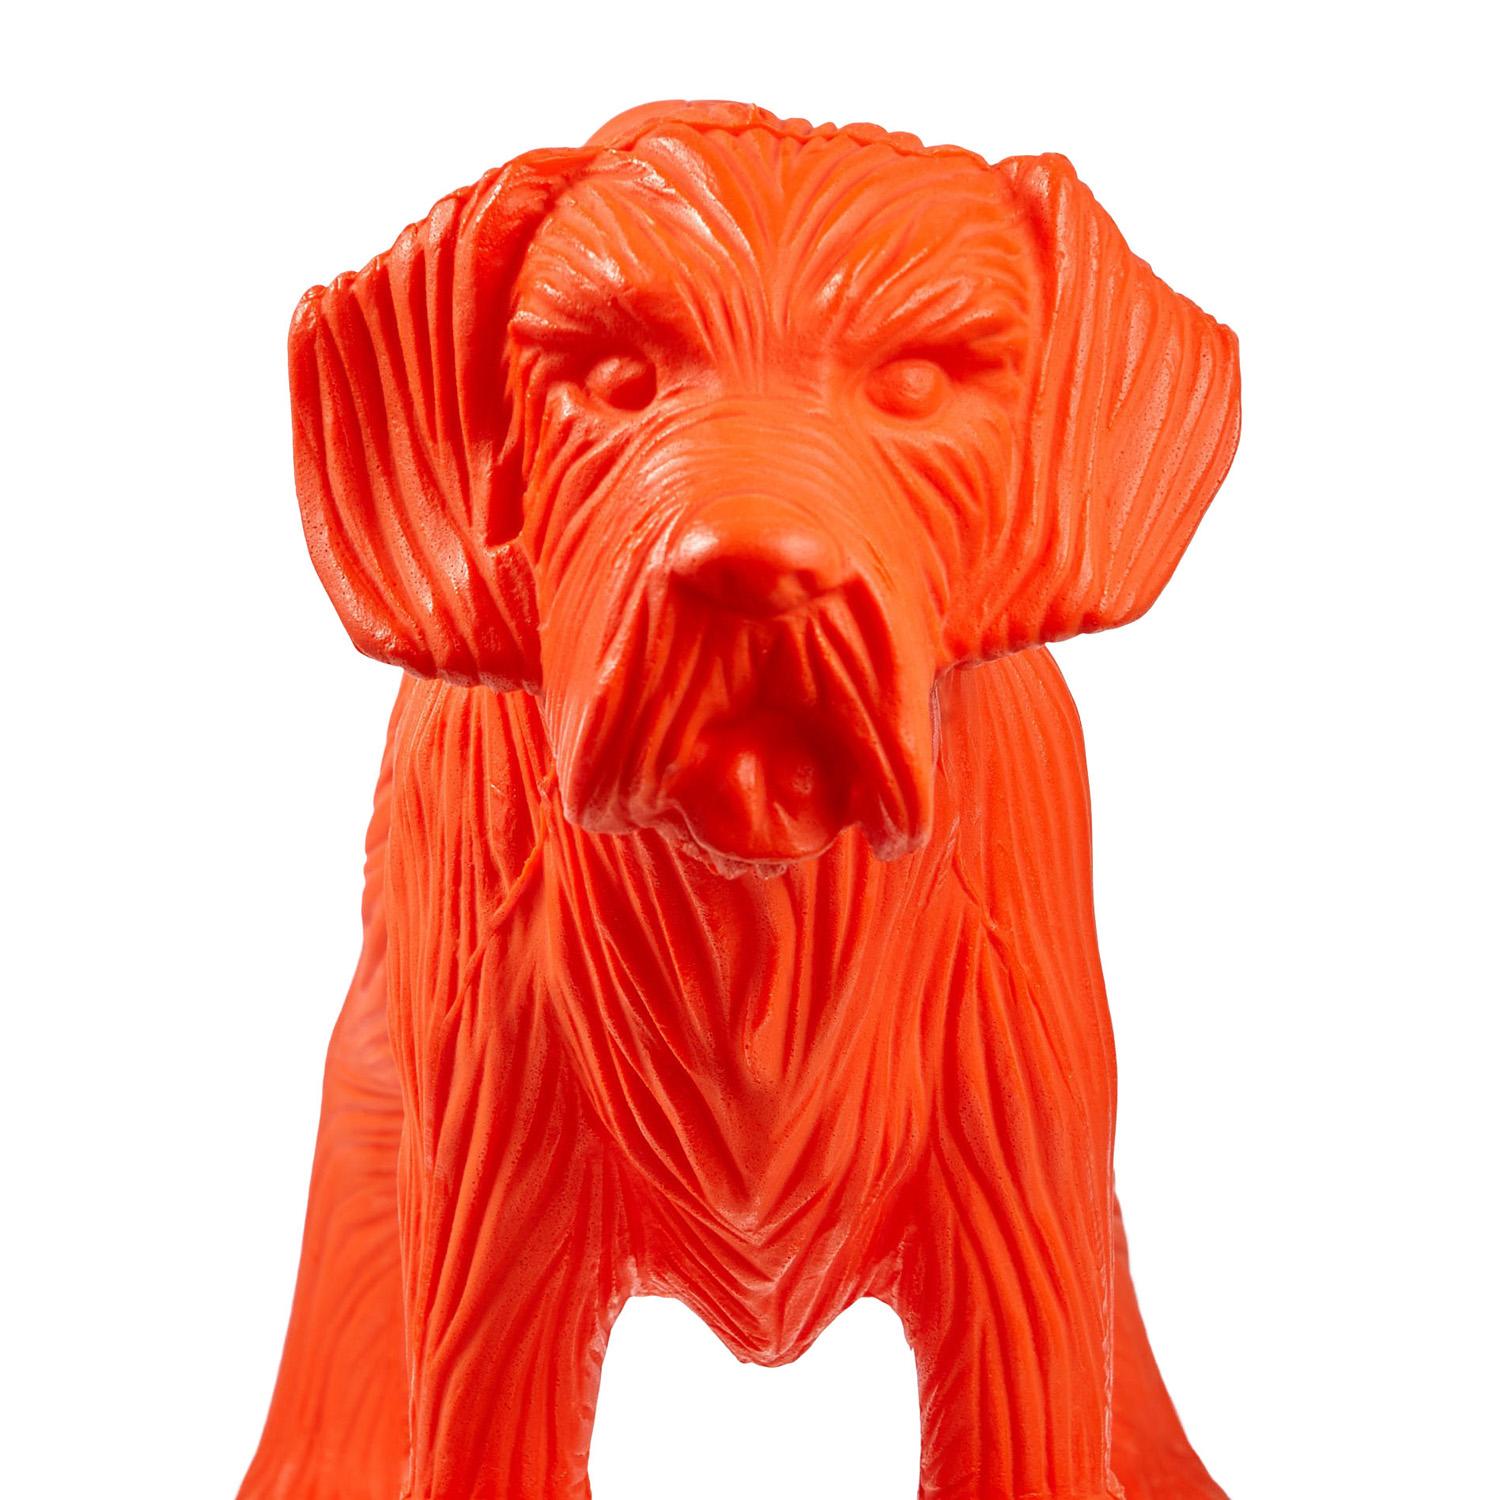 Cloned Schnauzer with water bottle  - Sculpture by William Sweetlove